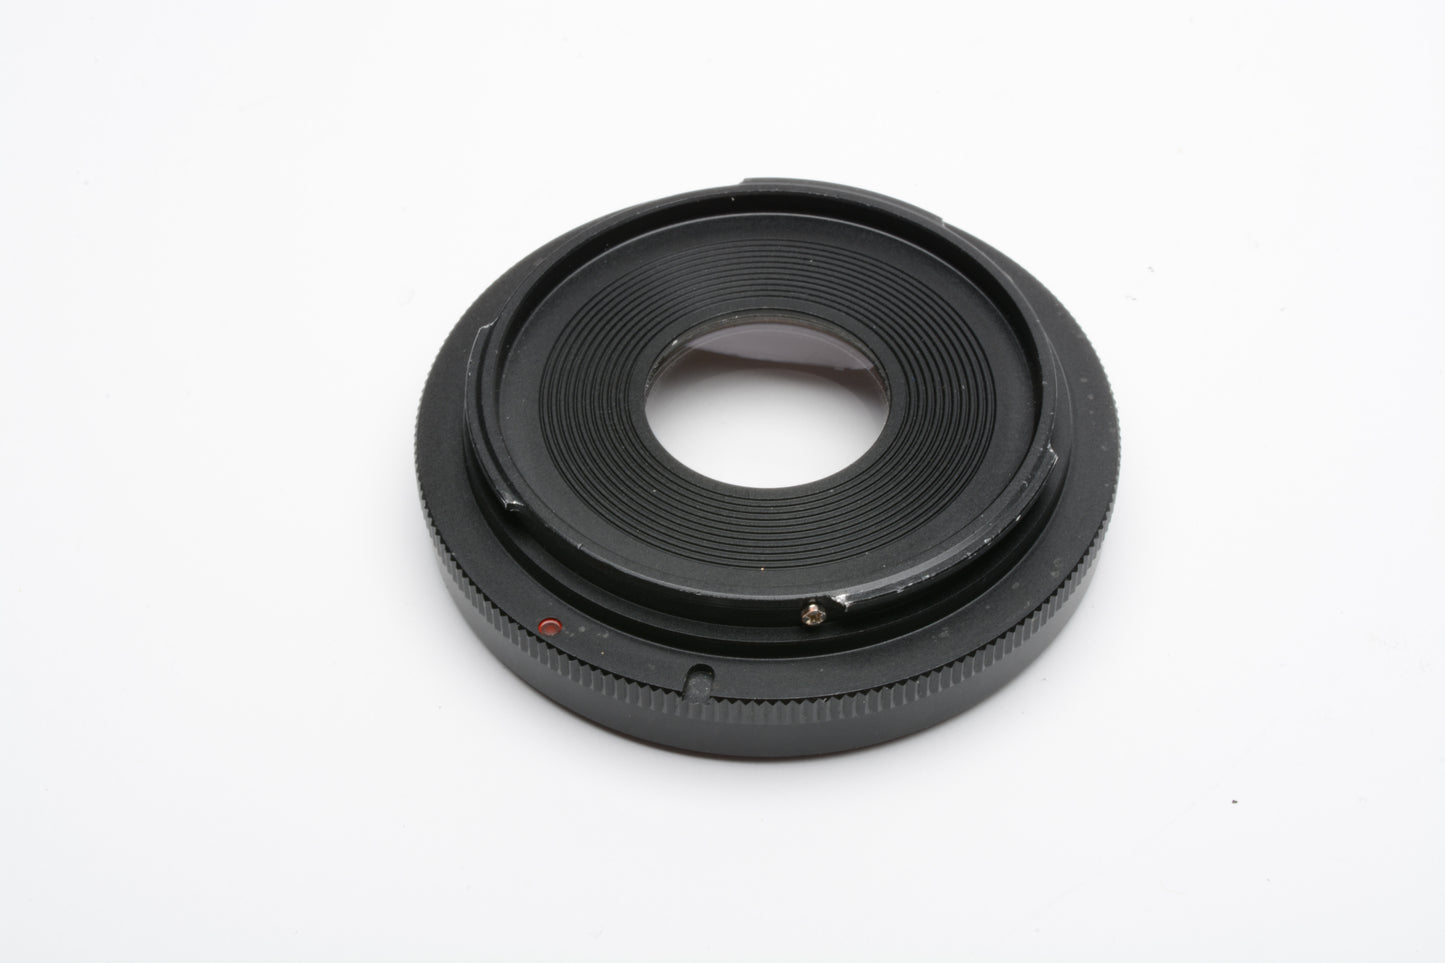 Fotodiox Minolta MD lenses to Canon EOS Mount adapter - New